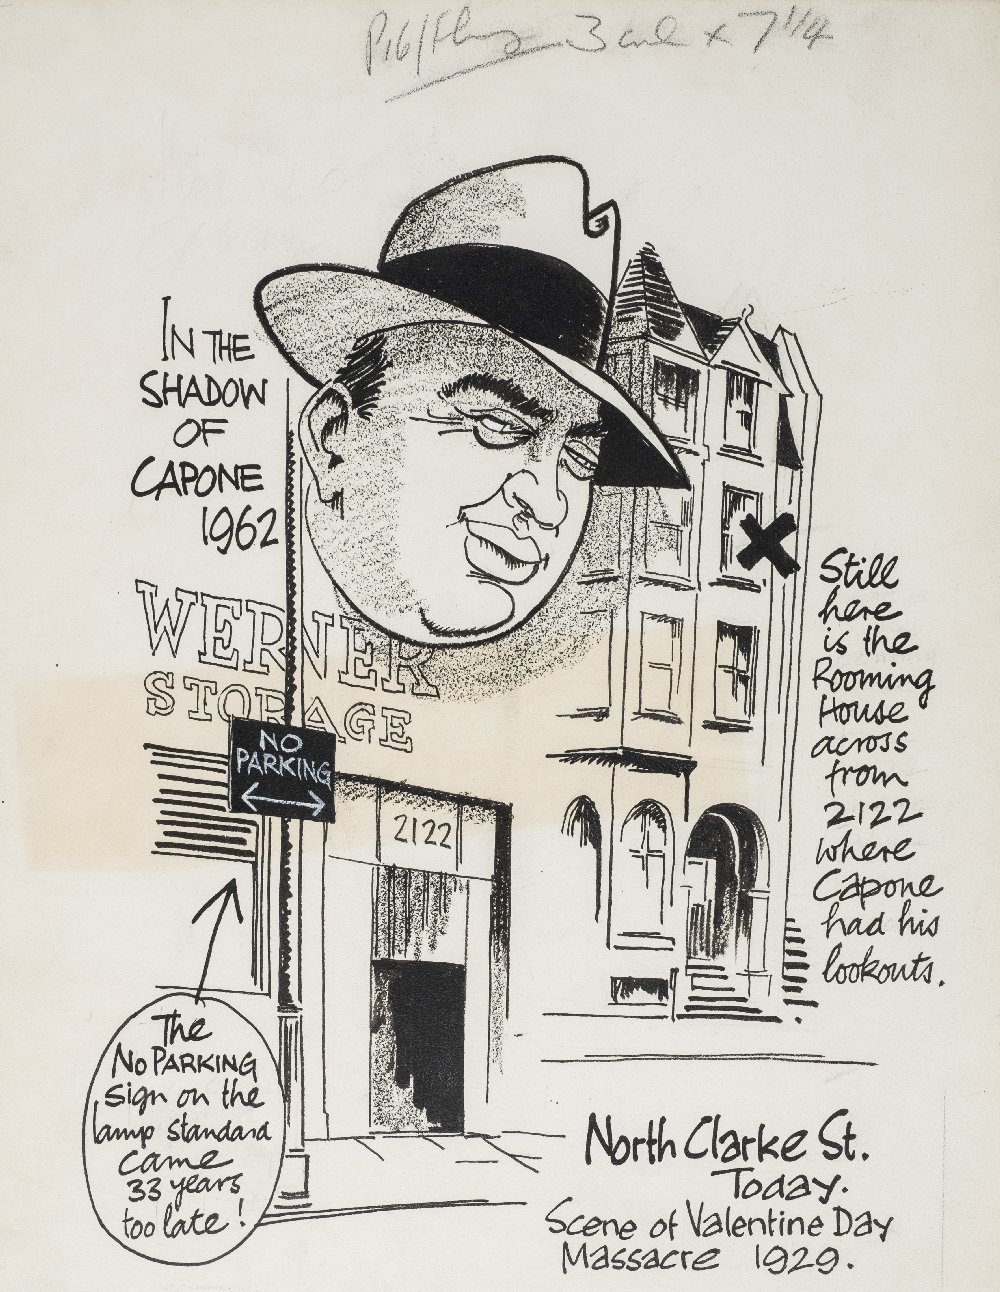 *[Al Capone]. In the Shadow of Capone 1962, original artwork for a (?)Daily Express illustration